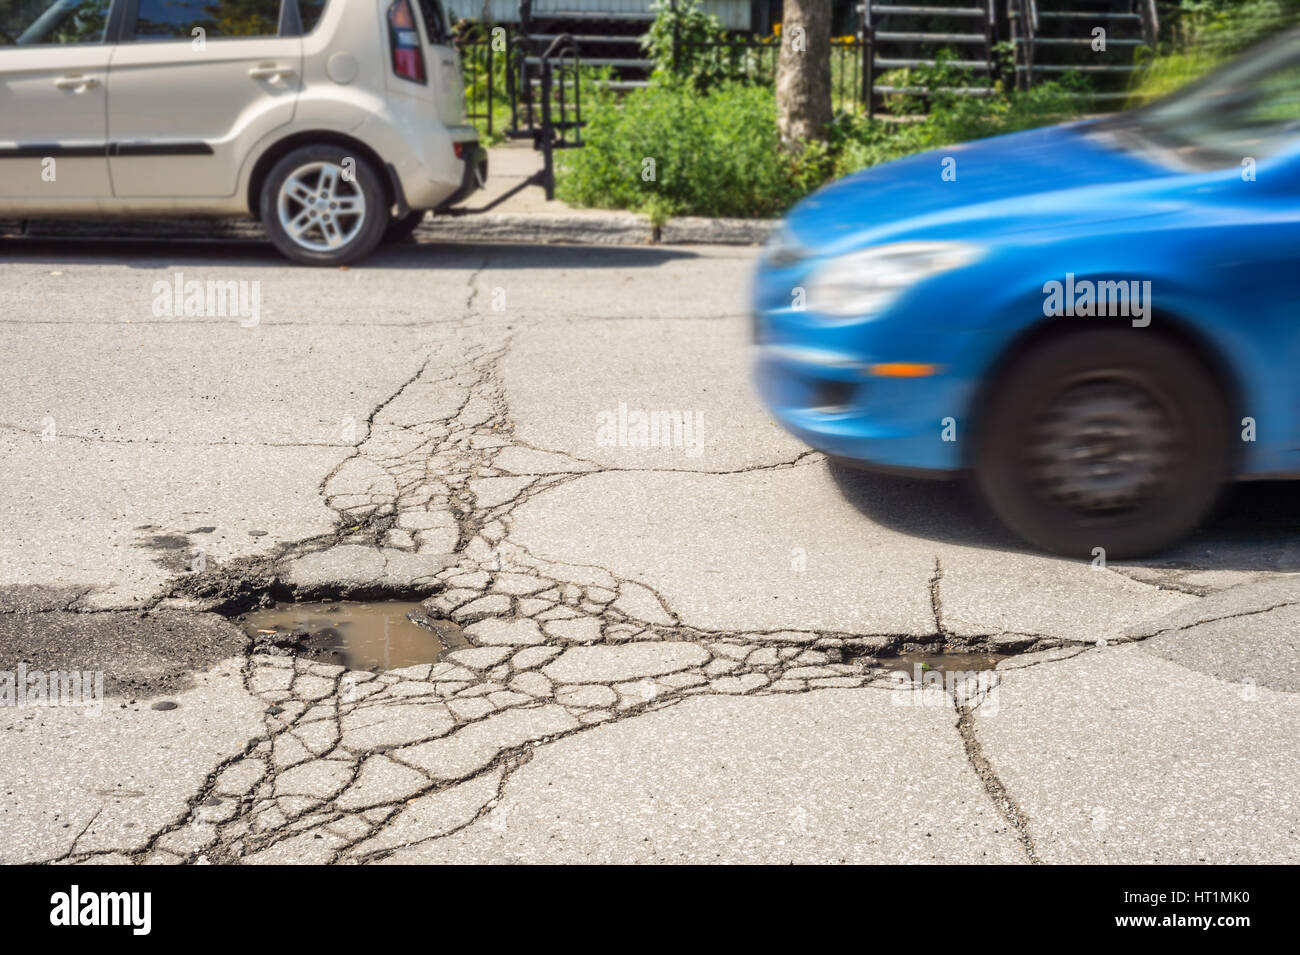 Large deep pothole with car approaching in Montreal street, Canada. Stock Photo